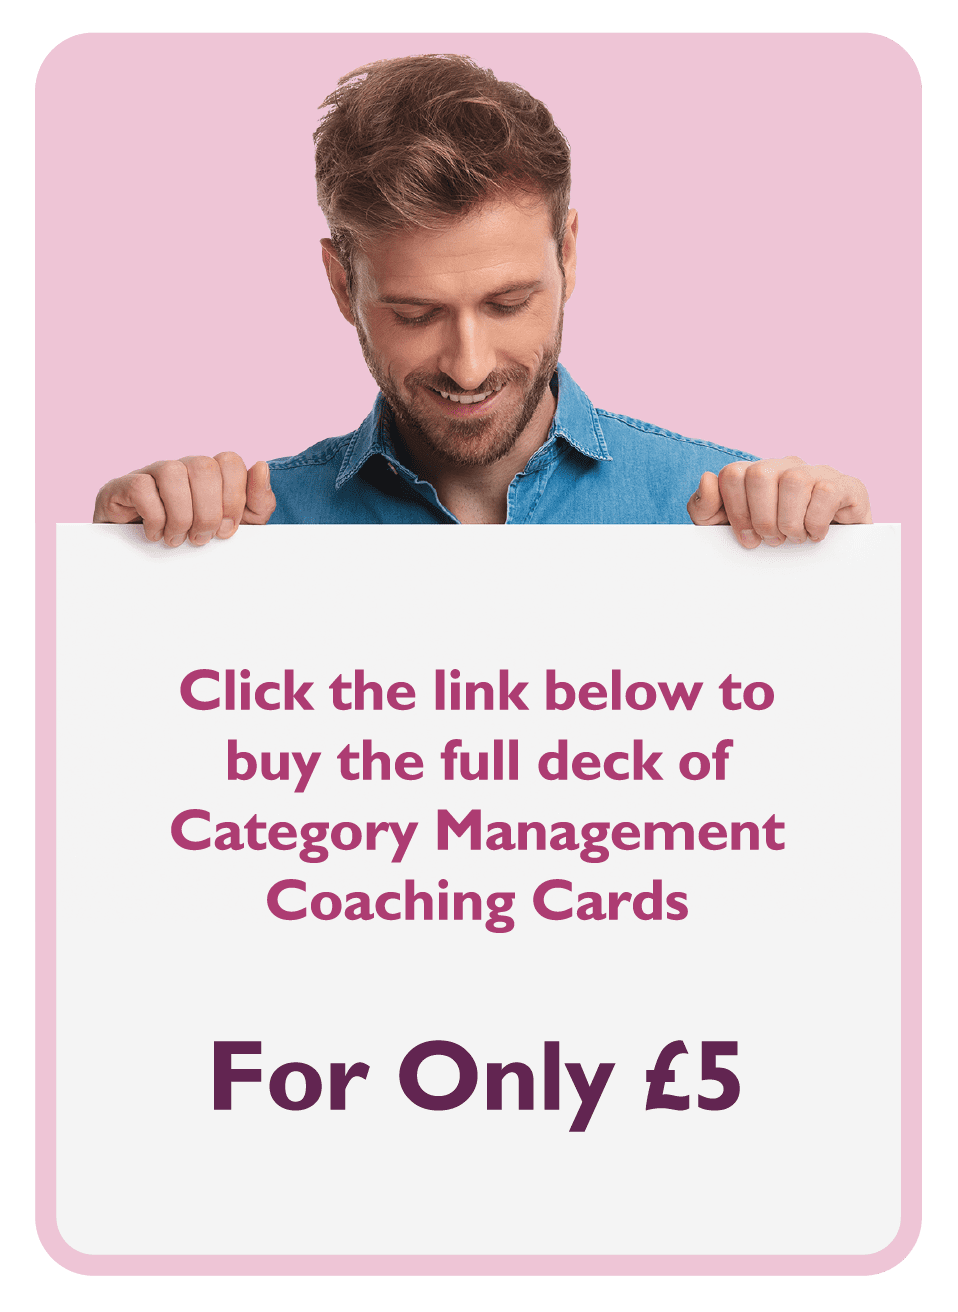 Negotiation coaching card titled For Only £5